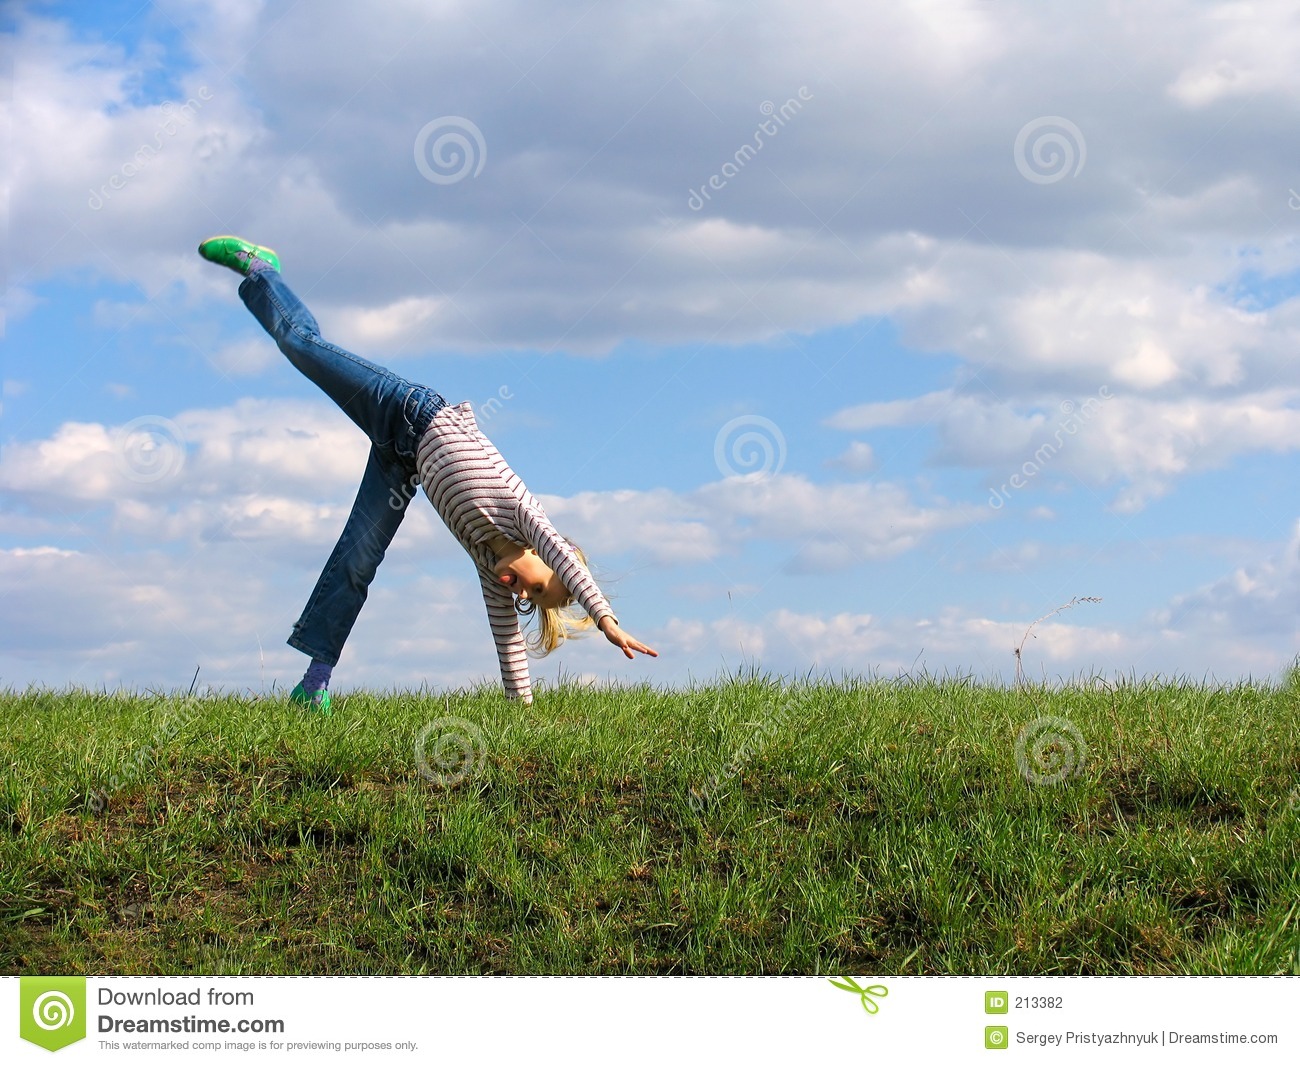 Somersault On Grass On The Sky Clouds Background